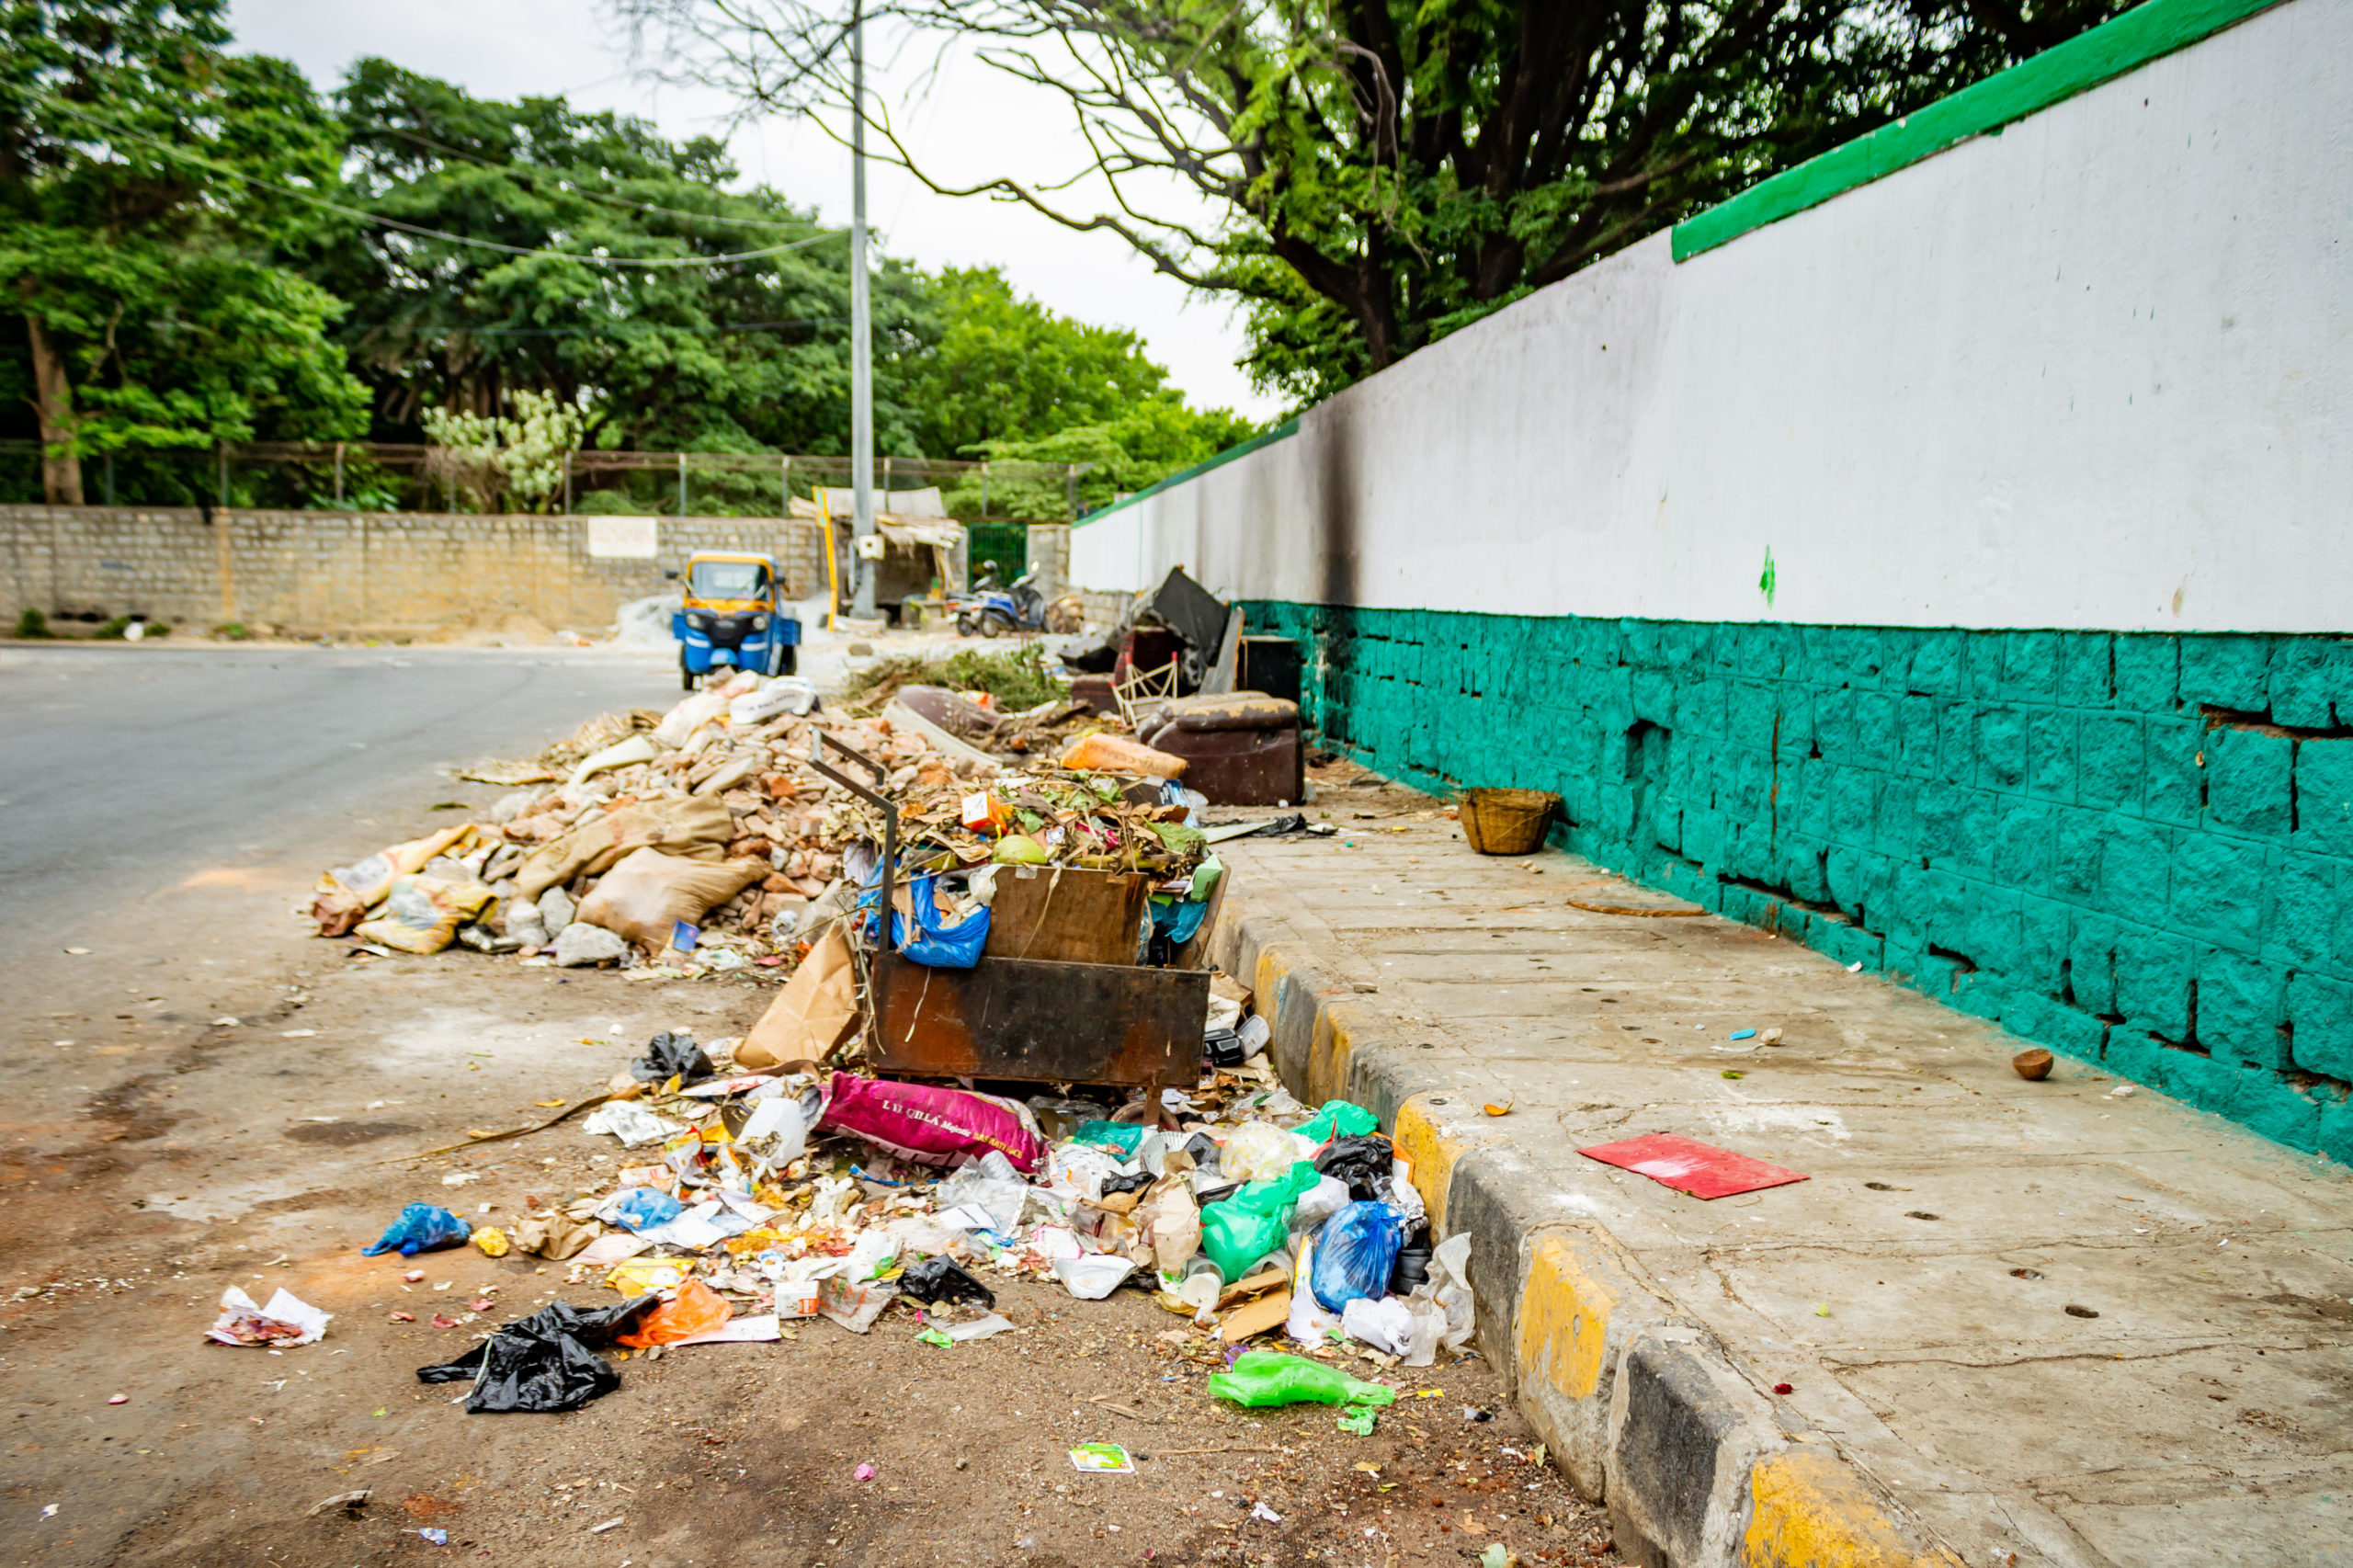 Karnataka to set up new agency to oversee the functioning of waste processing units?